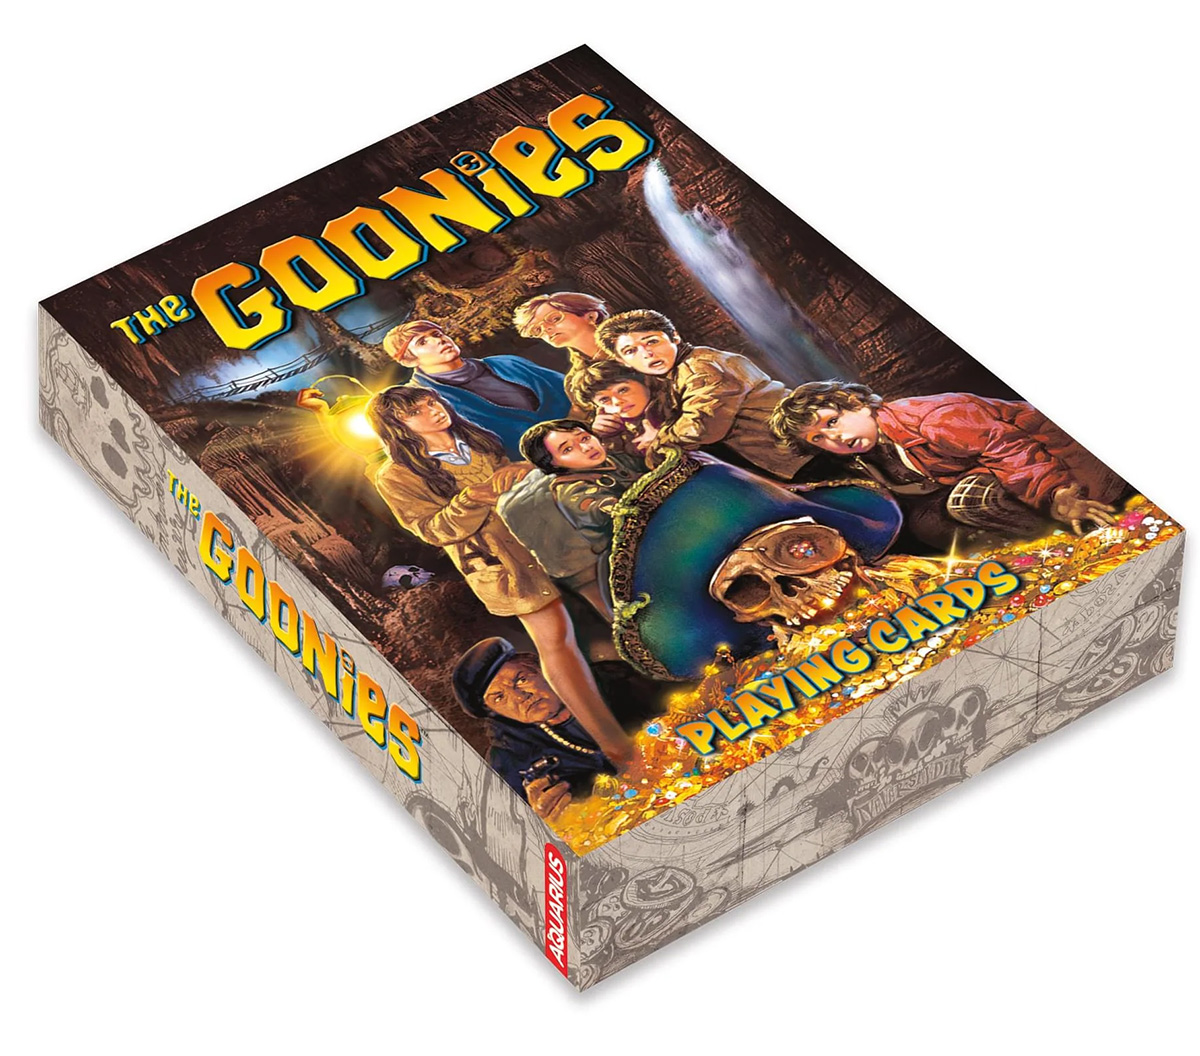 The Goonies Movie Deck with Pirate One-Eyed Willy's Treasure